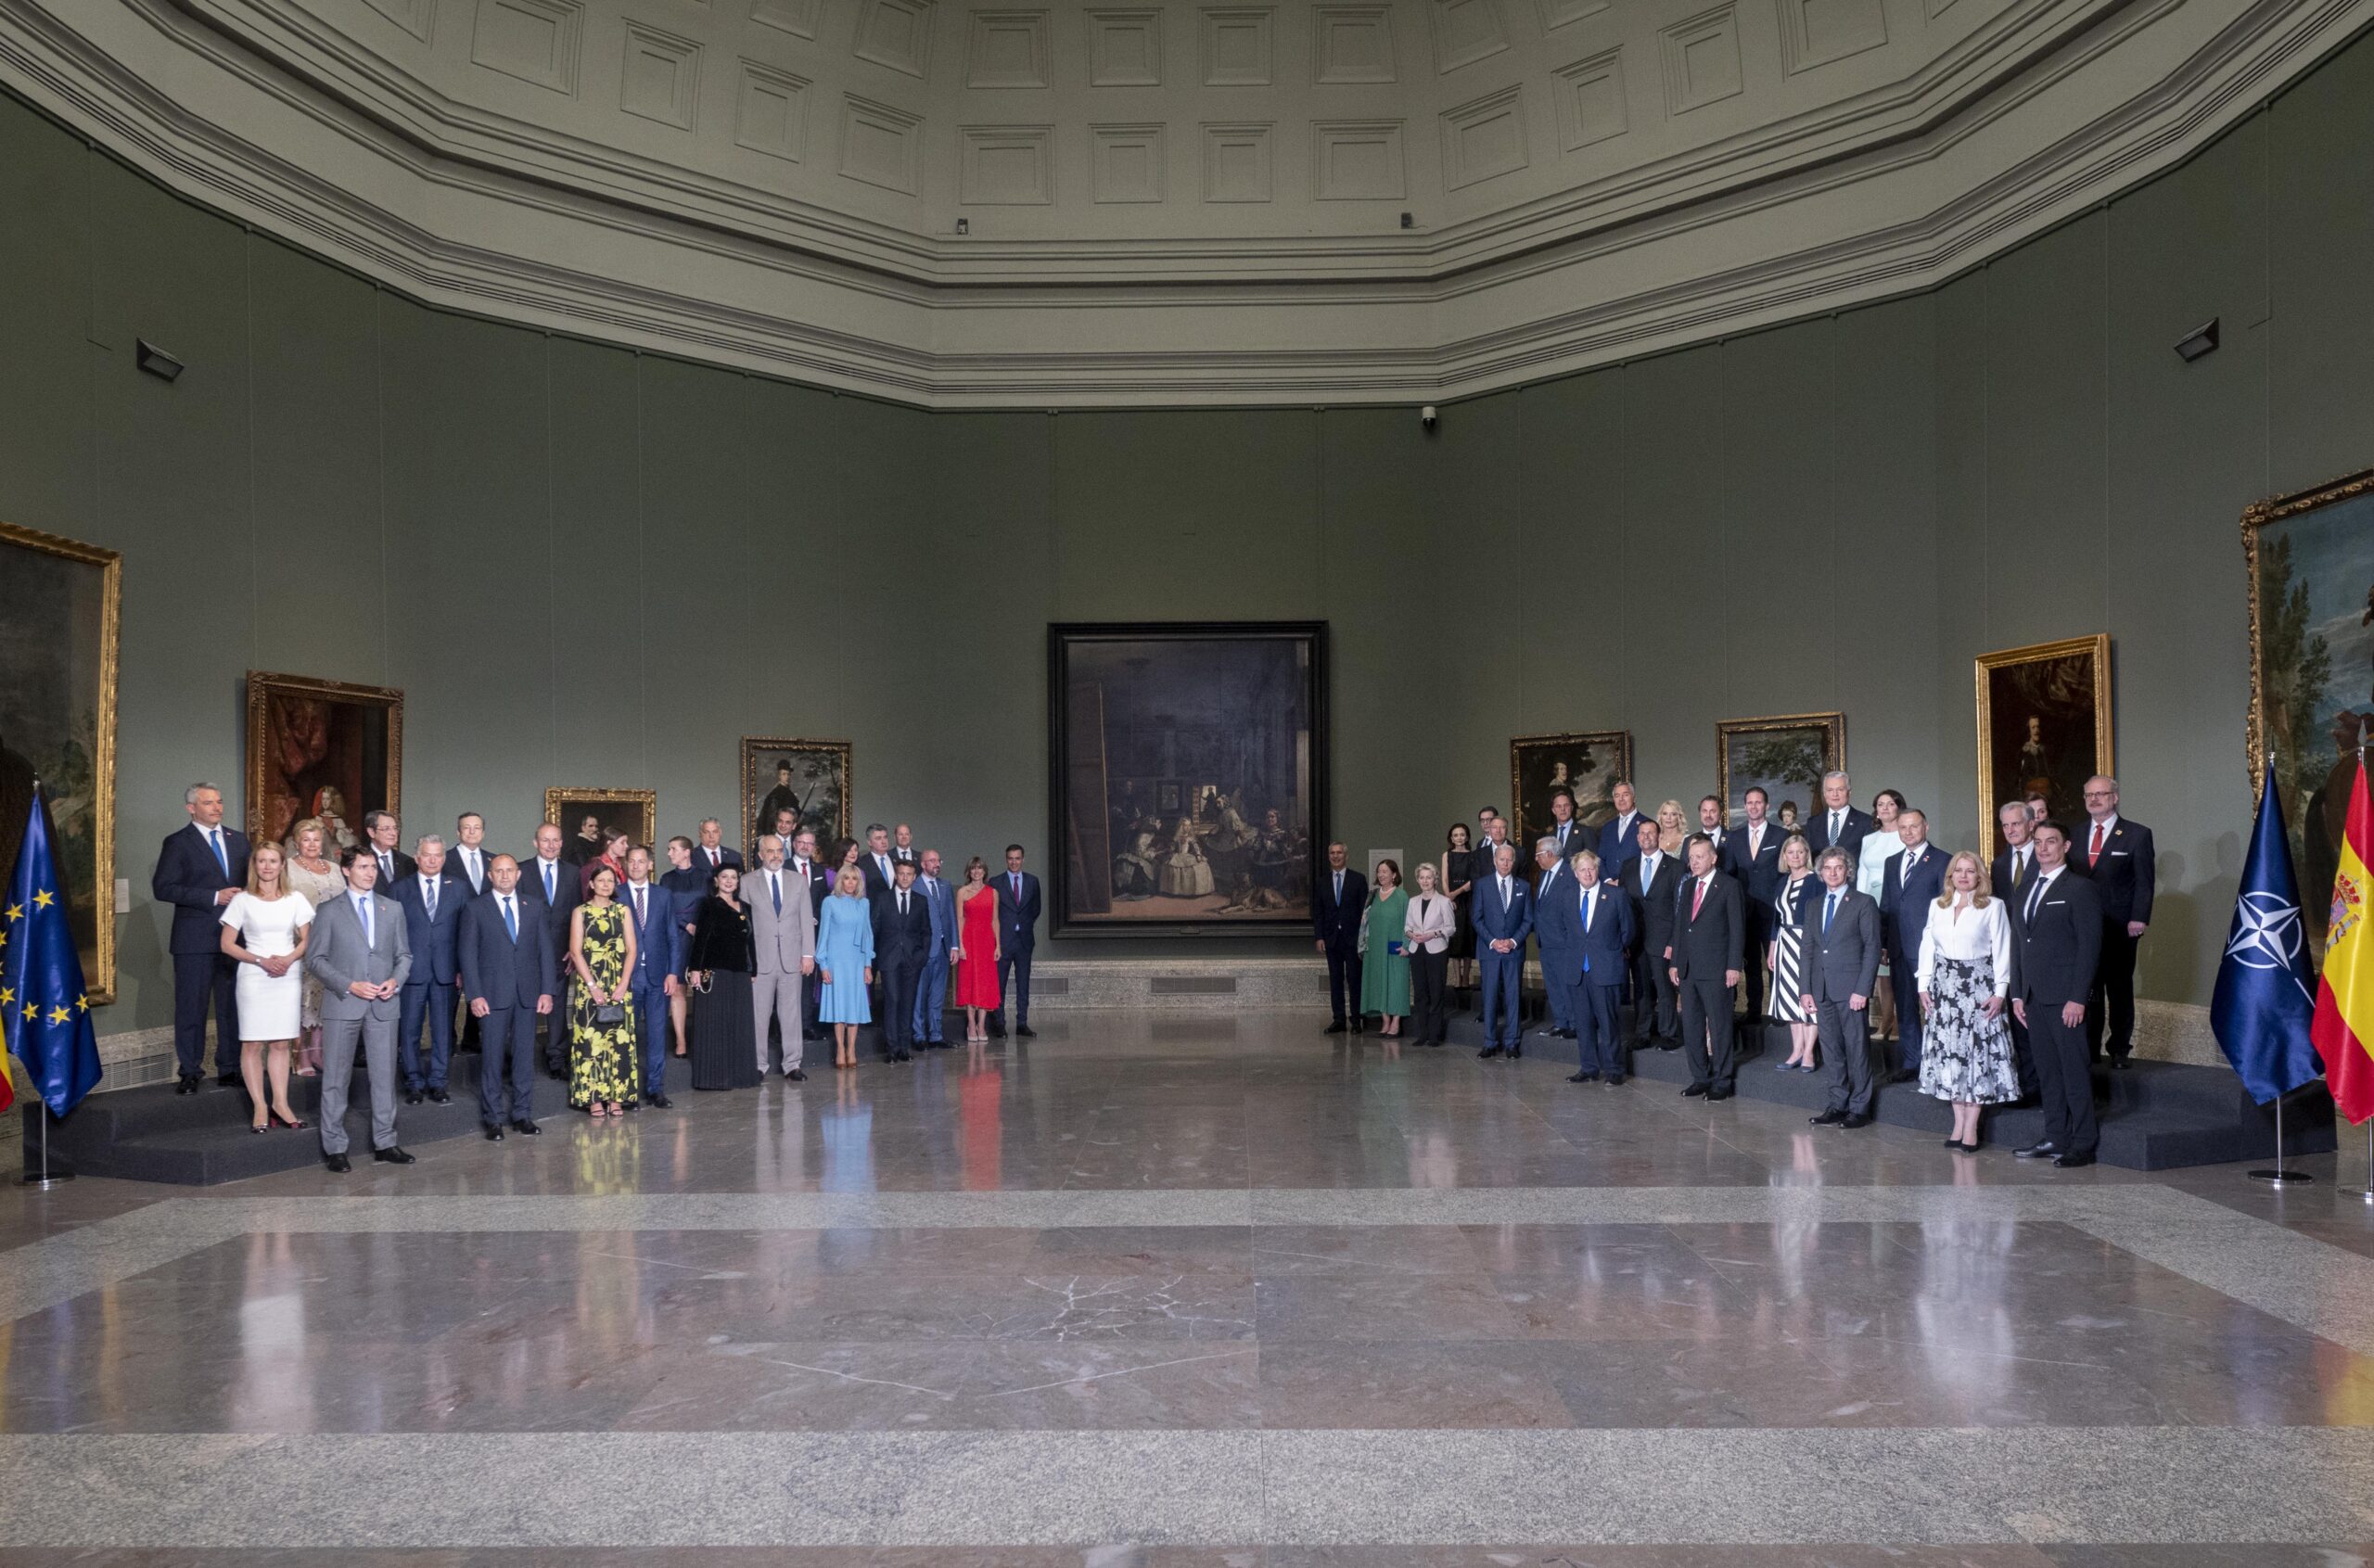 NATO leaders with artwork